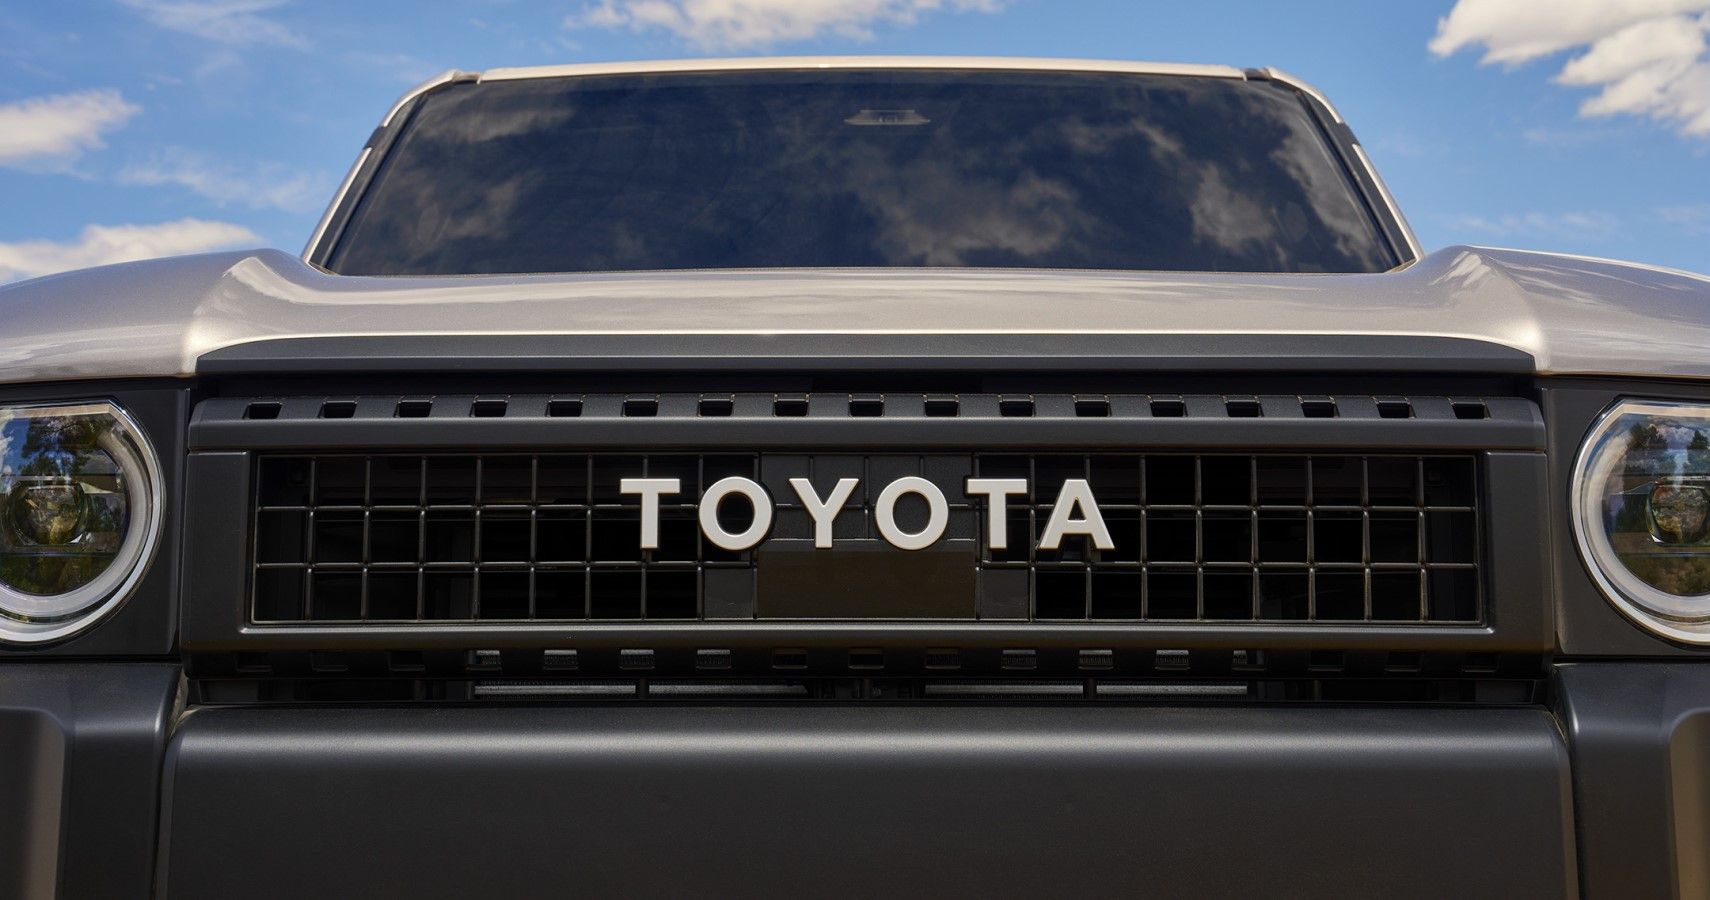 2025 Toyota Land Cruiser front grille close-up shot